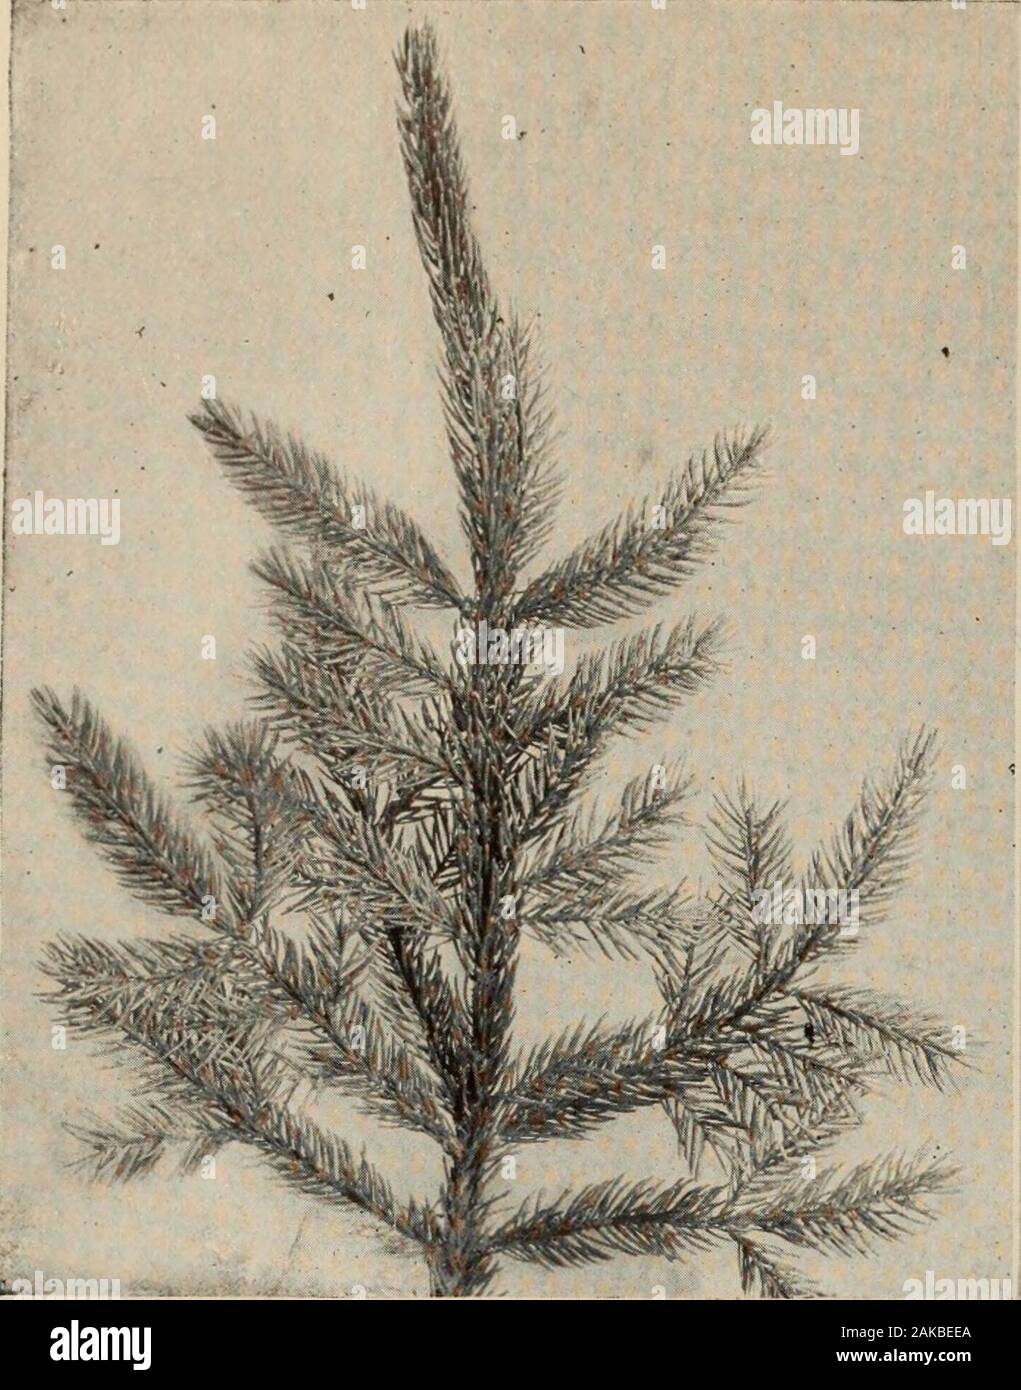 The tree book : A popular guide to a knowledge of the trees of North America and to their uses and cultivation . A. Winter bud (some leaves cut away to show bud) THE JERSEY PINE {Pinus Virginiana) This also is a scrub pine; it grows on the pine barrens of New Jersey, a pendulous, discouraged tree. Its grey-green leavesare in bundles of twos. It does as well as a tree can on worthless soil. In Indiana it becomes a pyramidal tree forty feet high.The cones are dark-red, curved, and armed with sharp prickles. Stock Photo